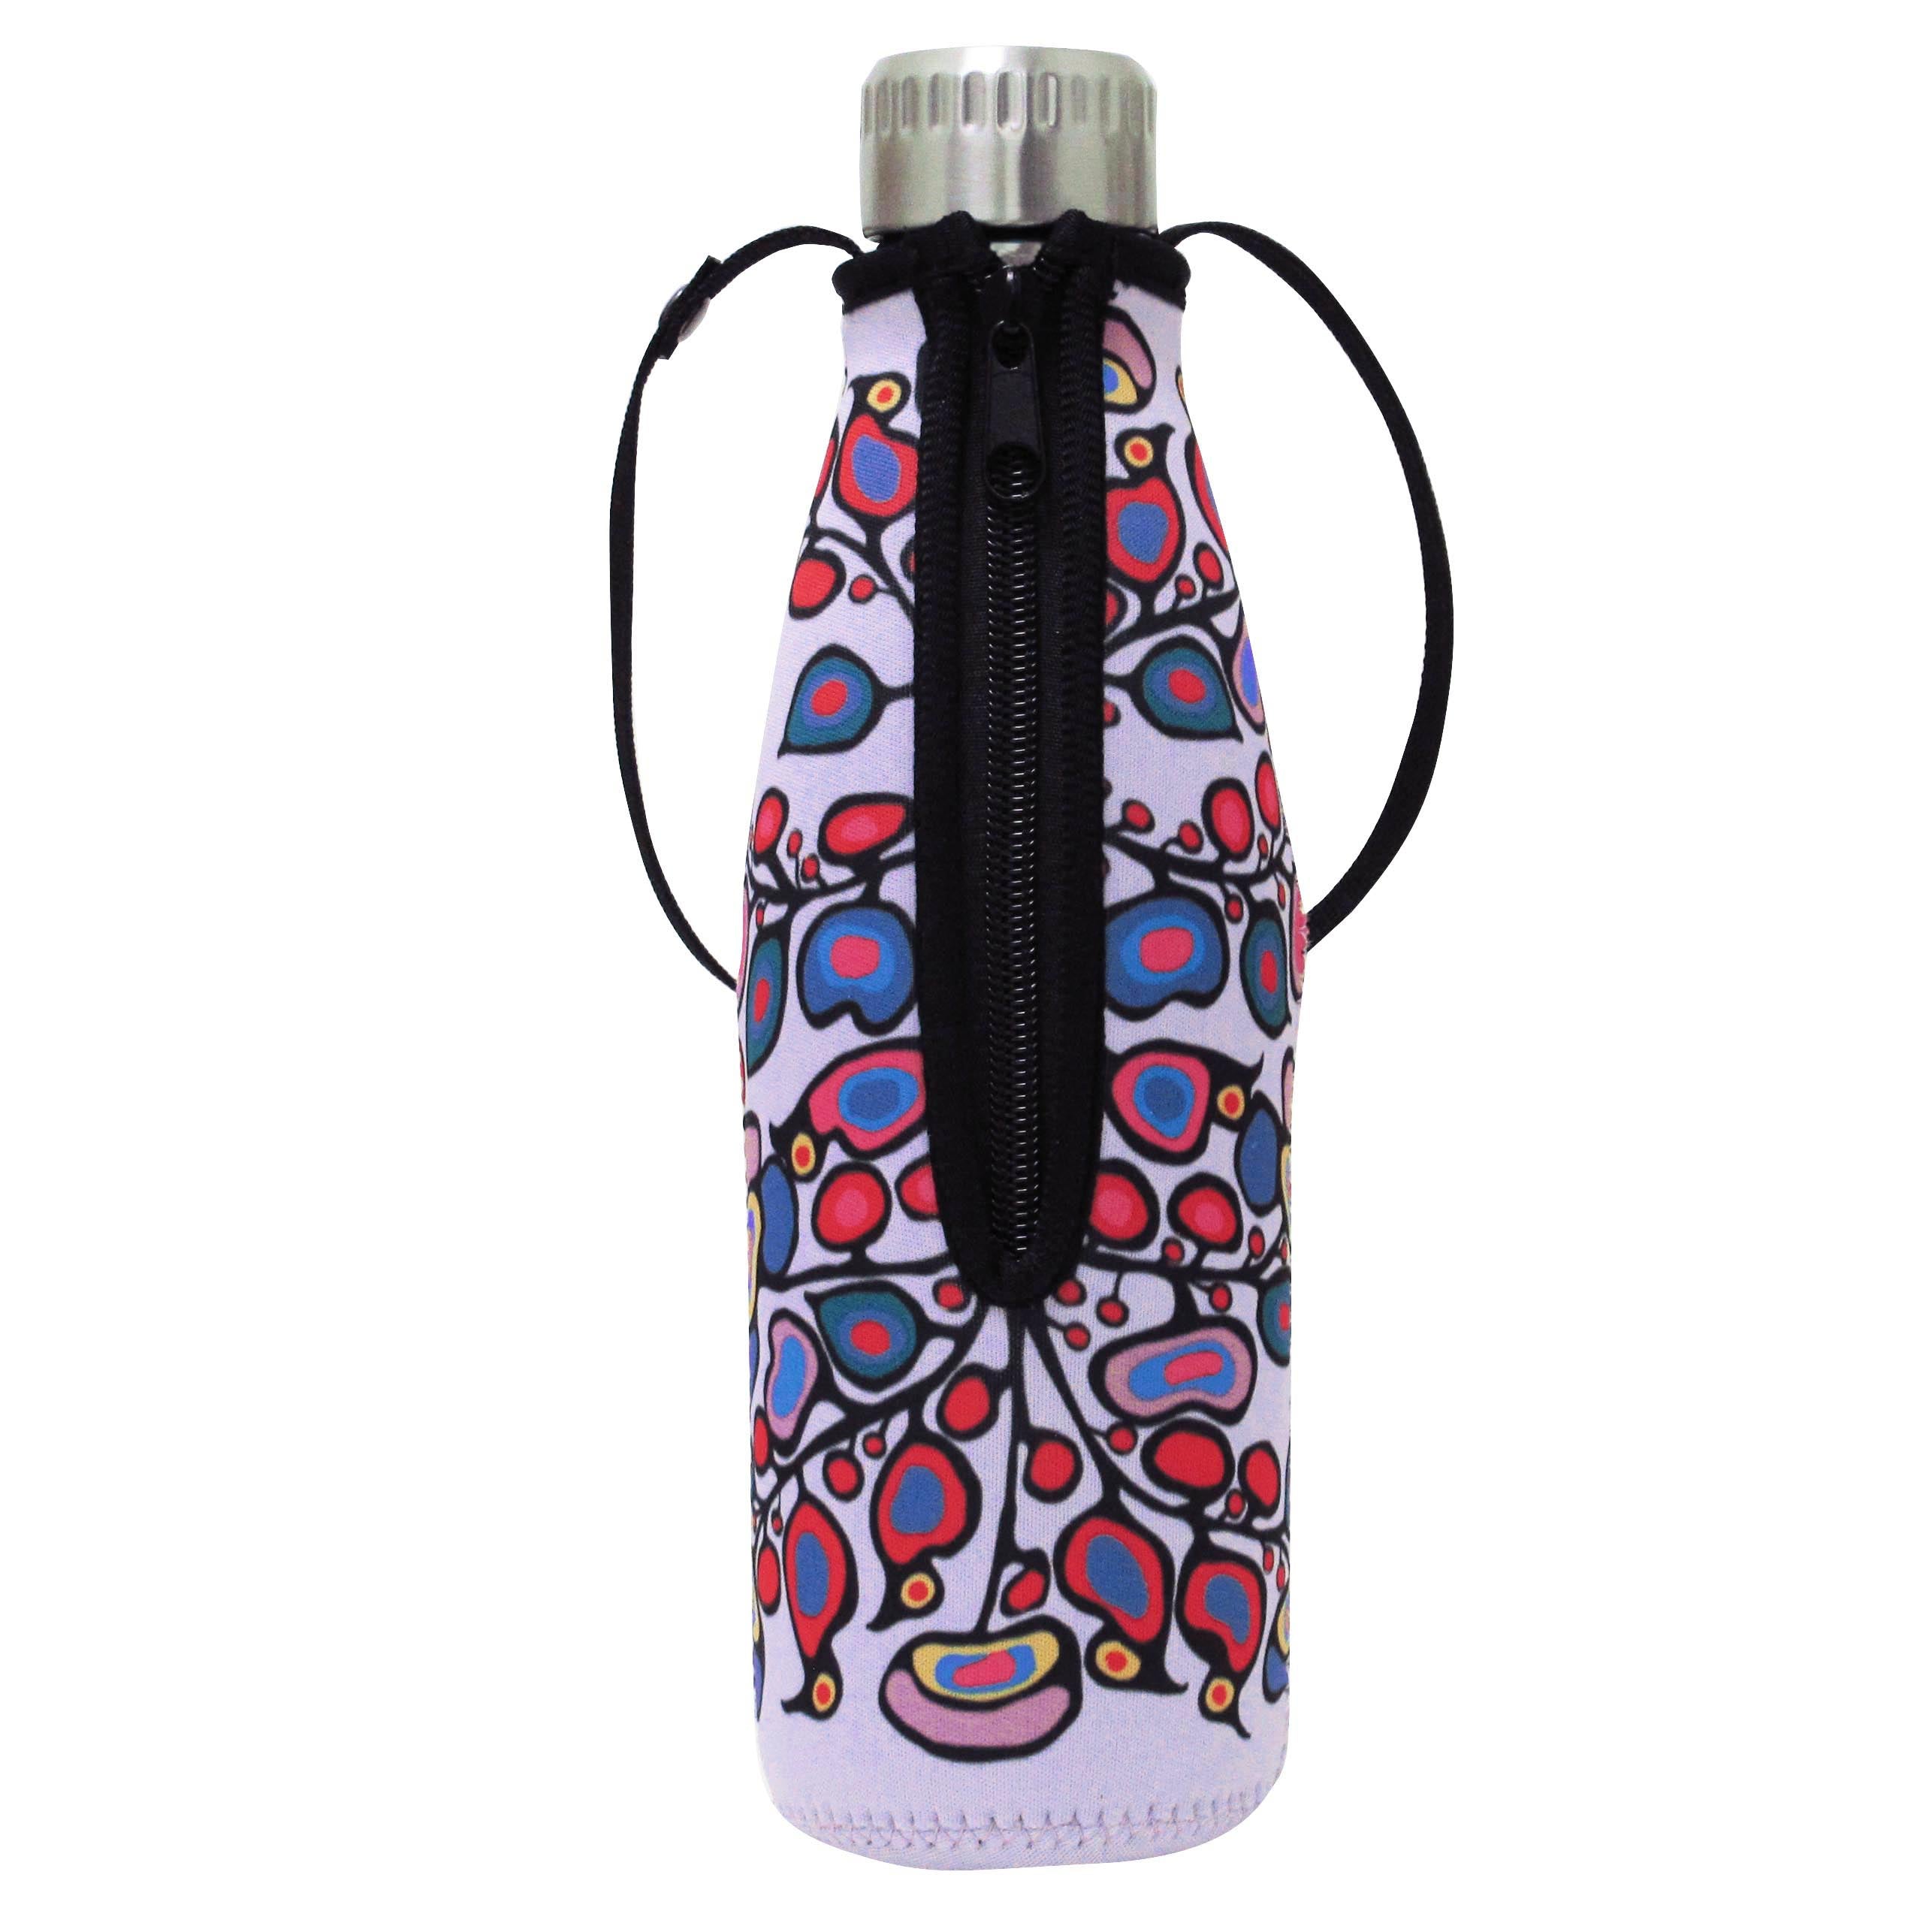 Norval Morrisseau Woodland Floral Water Bottle and Sleeve - Out of Stock